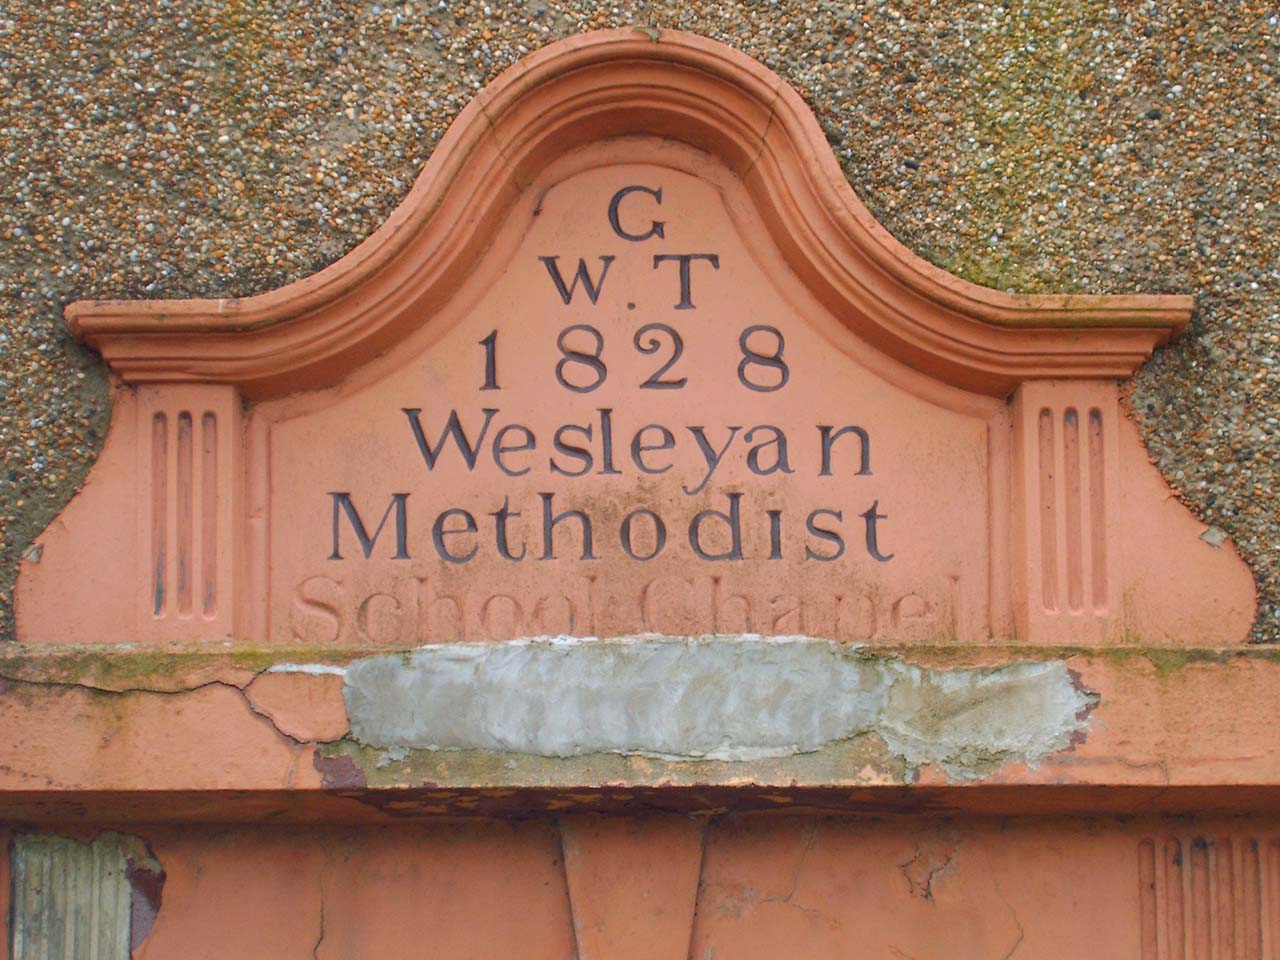 The Date Stone at New Row Methodist Church